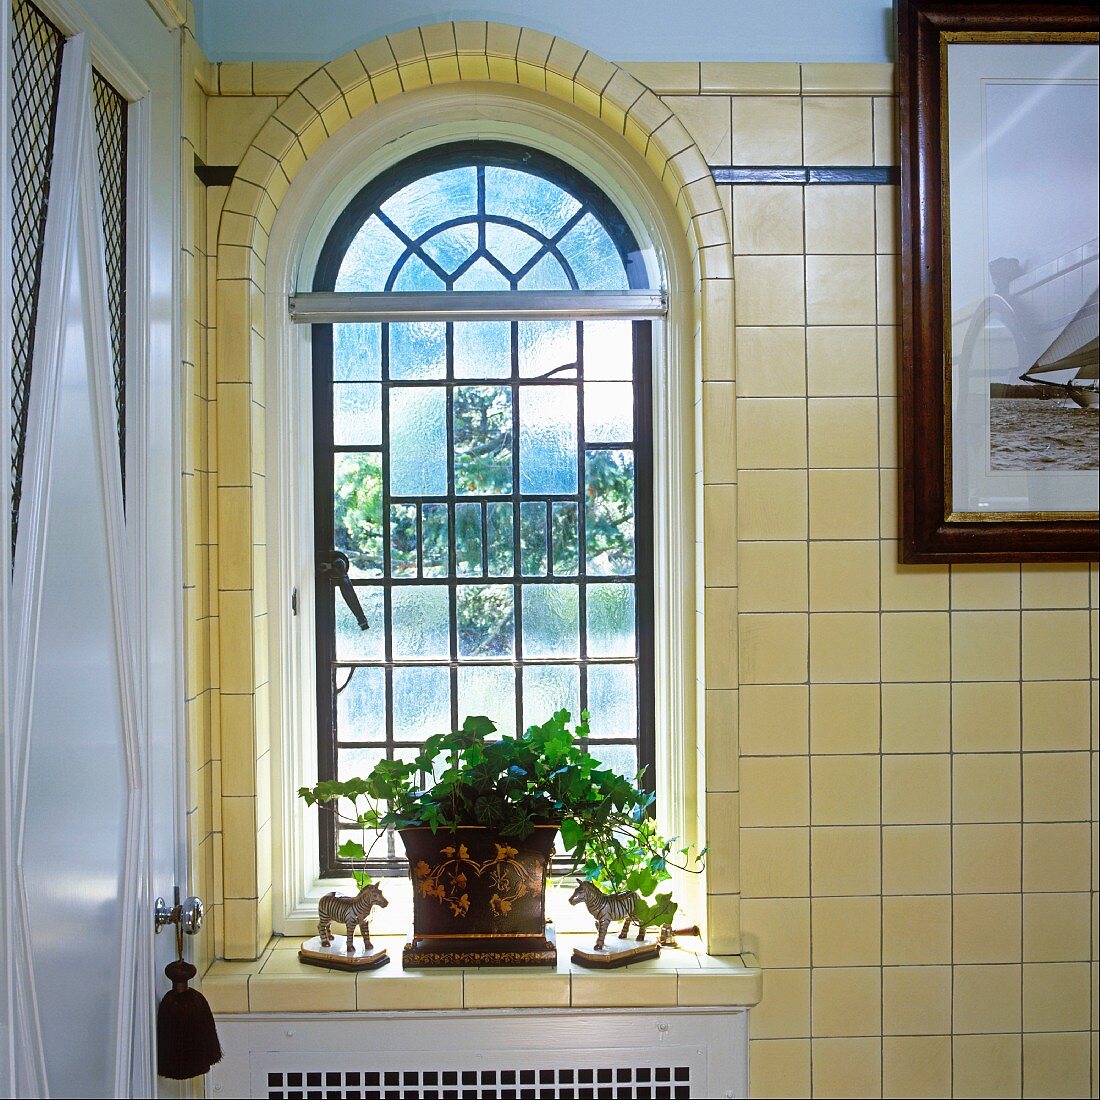 Leaded glass window with rounded arch, potted geranium and horse figurines